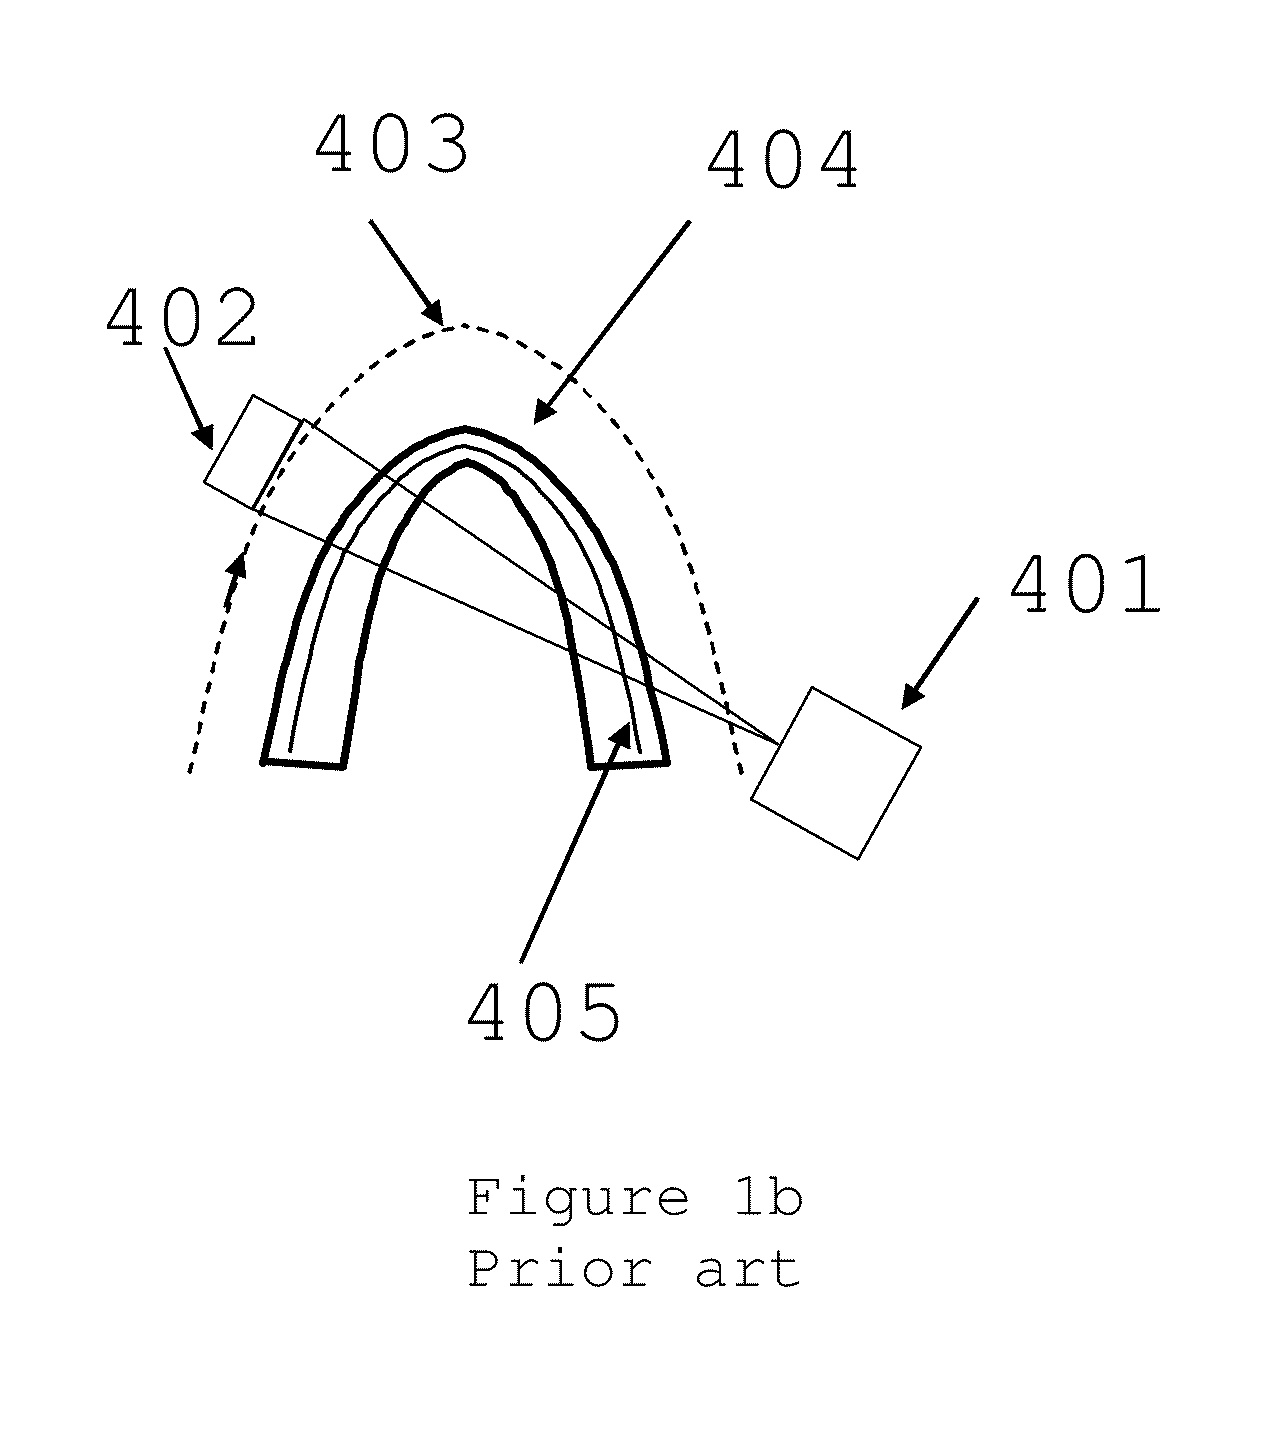 Single sensor multi-functional dental extra-oral x-ray imaging system and method